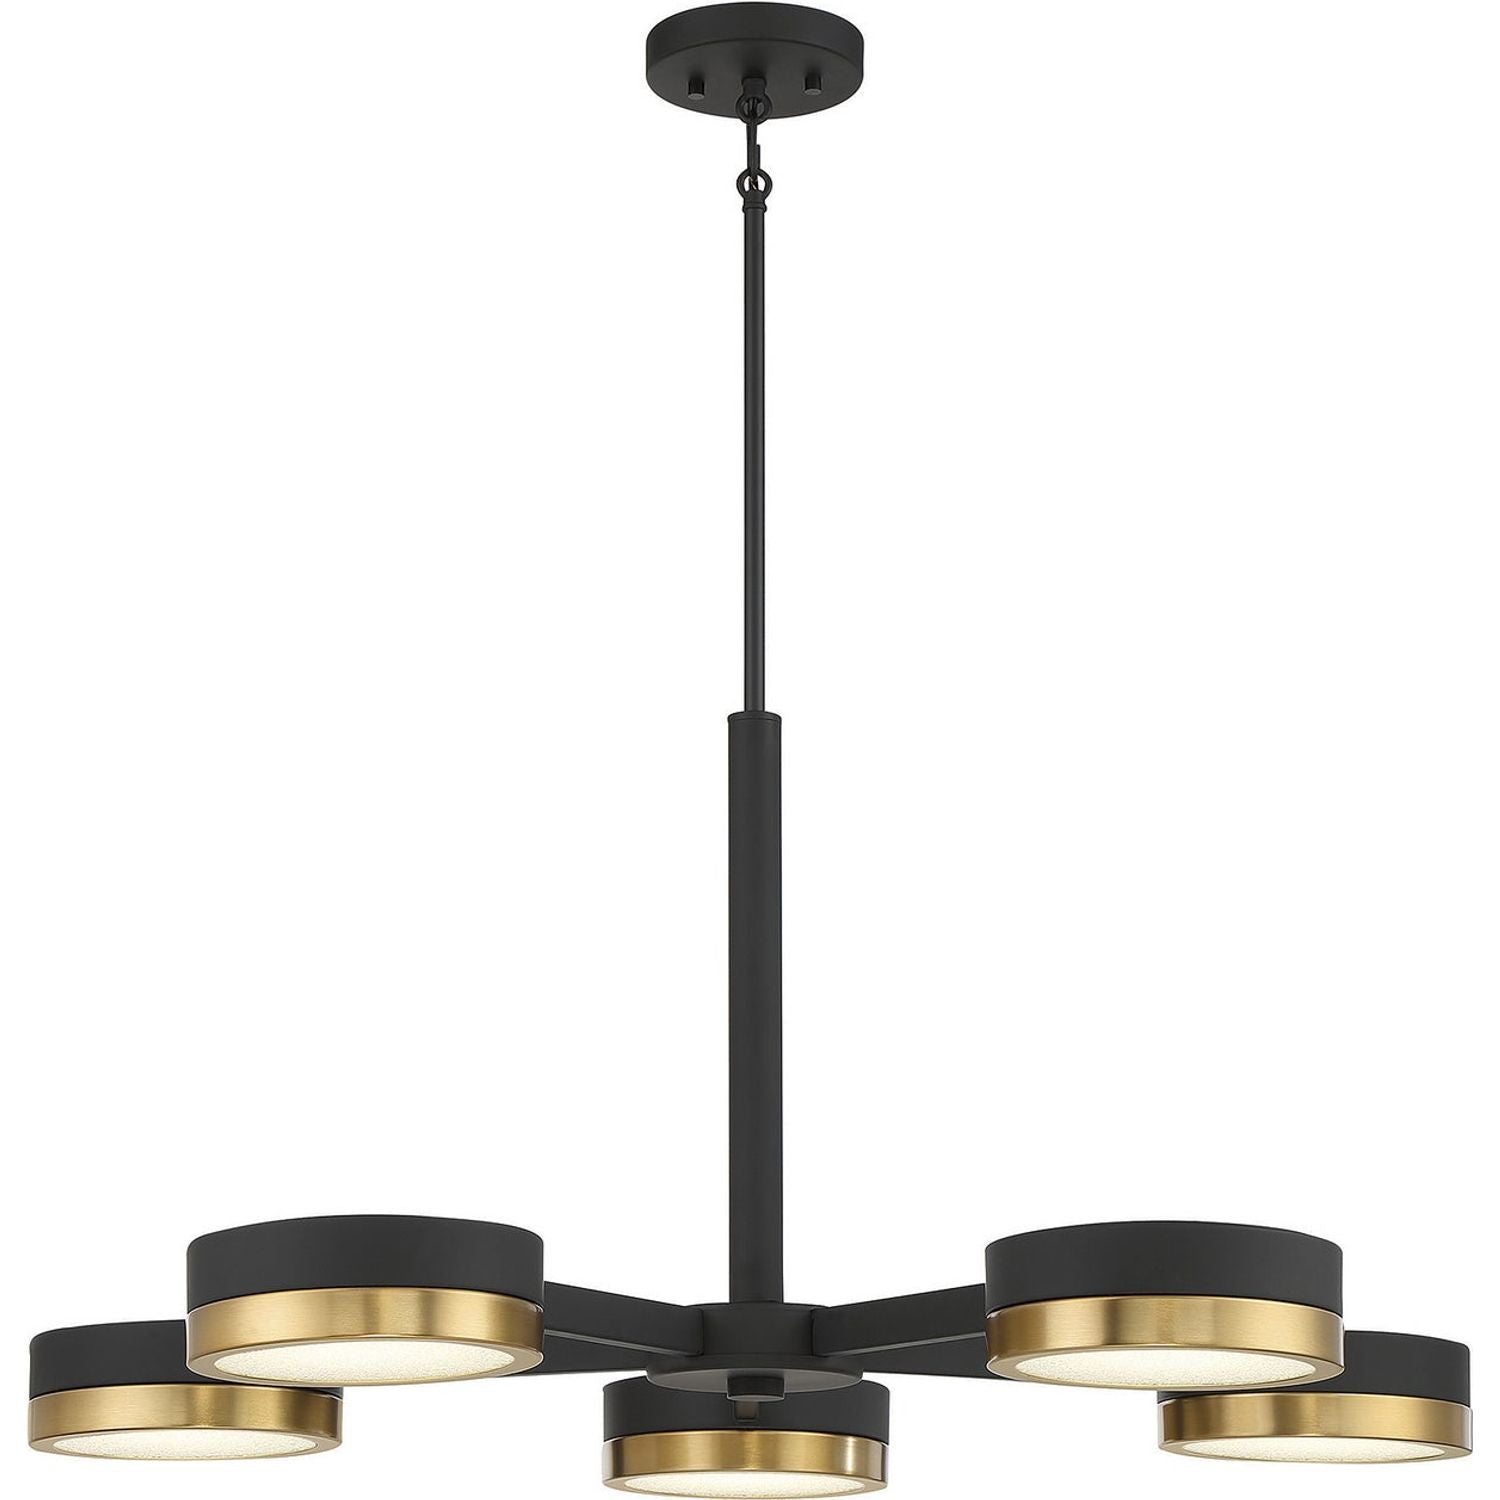 Savoy House - 1-1635-5-143 - LED Chandelier - Ashor - Matte Black with Warm Brass Accents